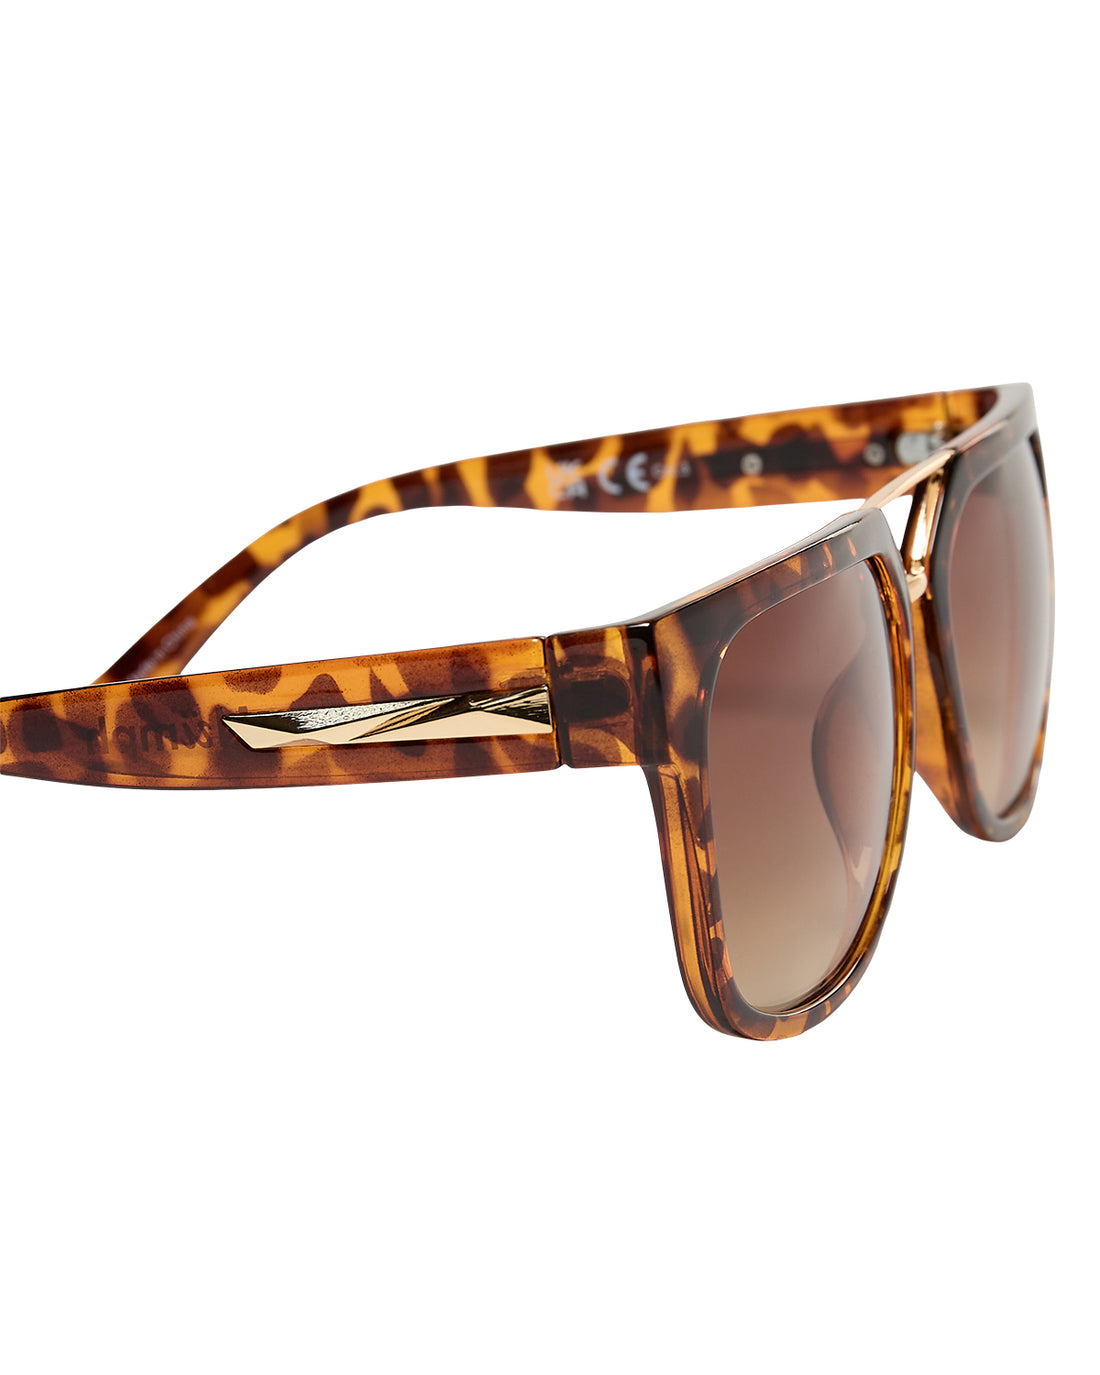 Nujoseph Tortoise Shell Sunglasses in Shell with Case